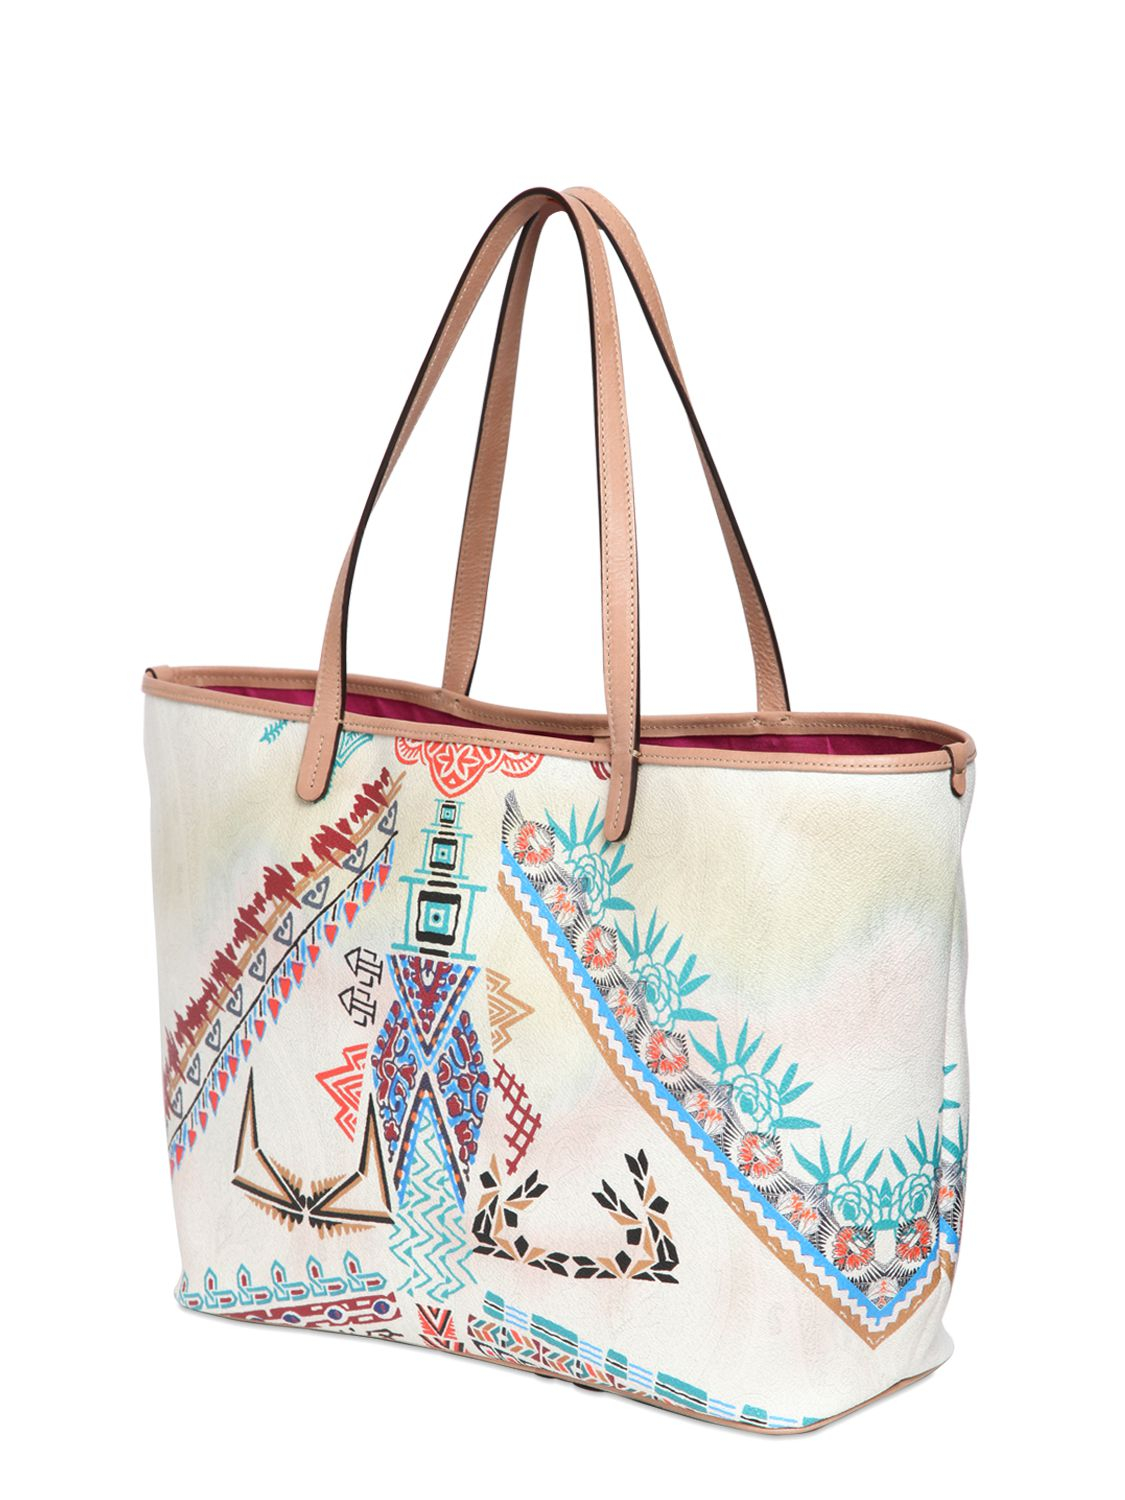 Lyst - Etro Print Coated Canvas Tote Bag